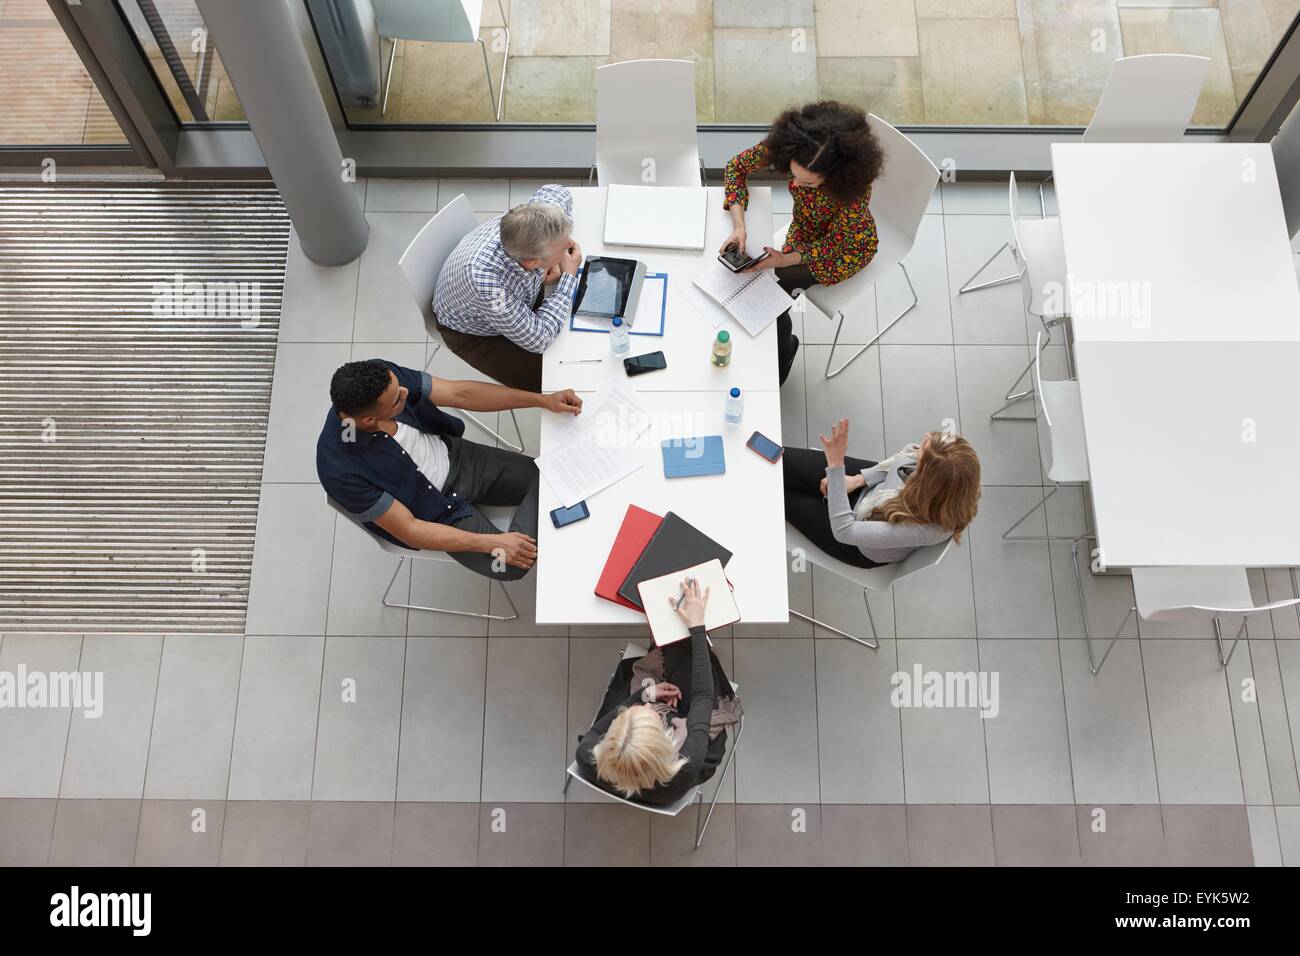 Overhead view of business team having meeting at conference table Stock Photo